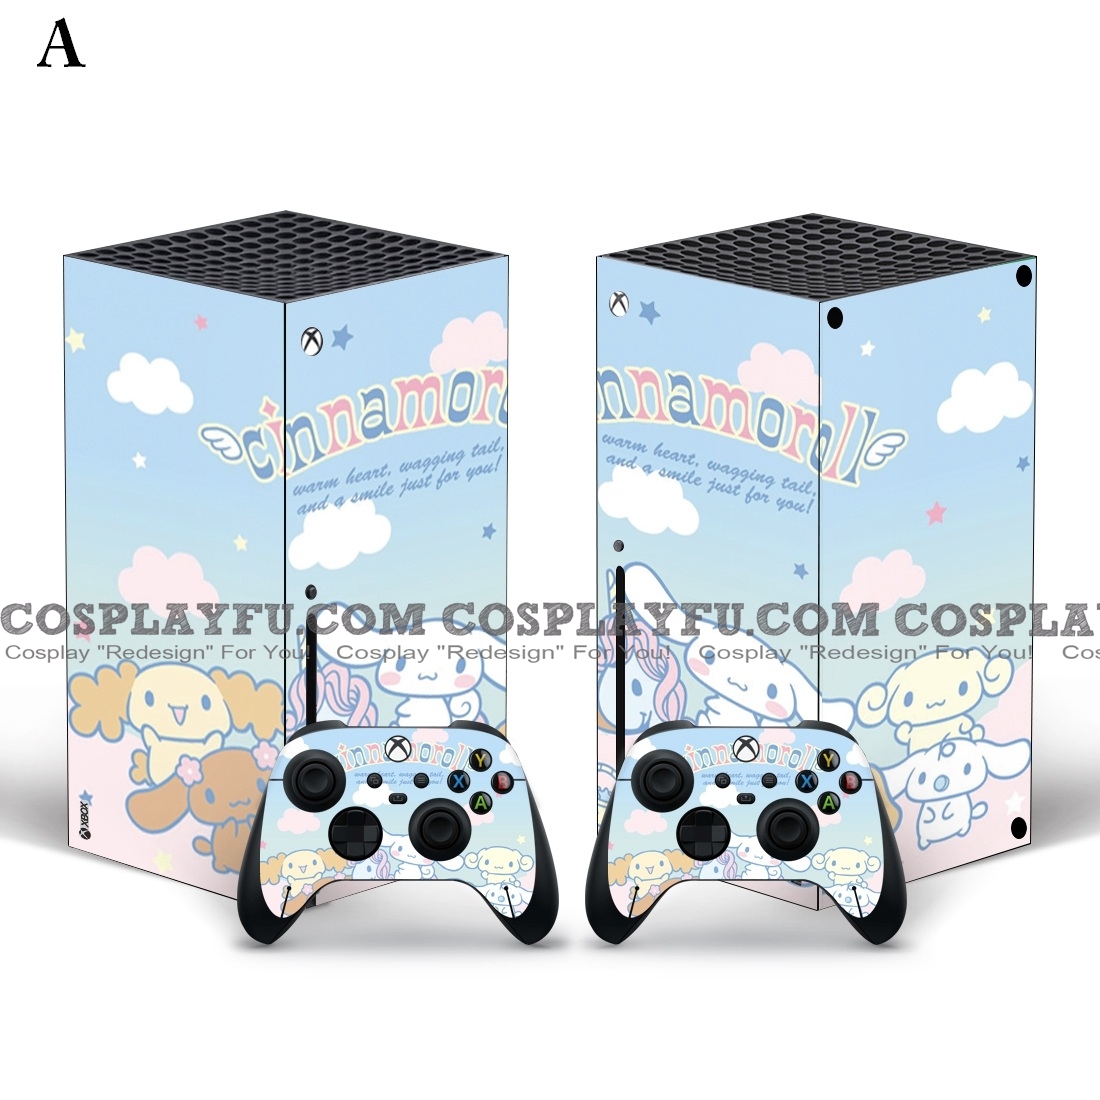 Japanese Dog Skin Decal For Xbox Series X Console And Controller, Full Wrap Vinyl